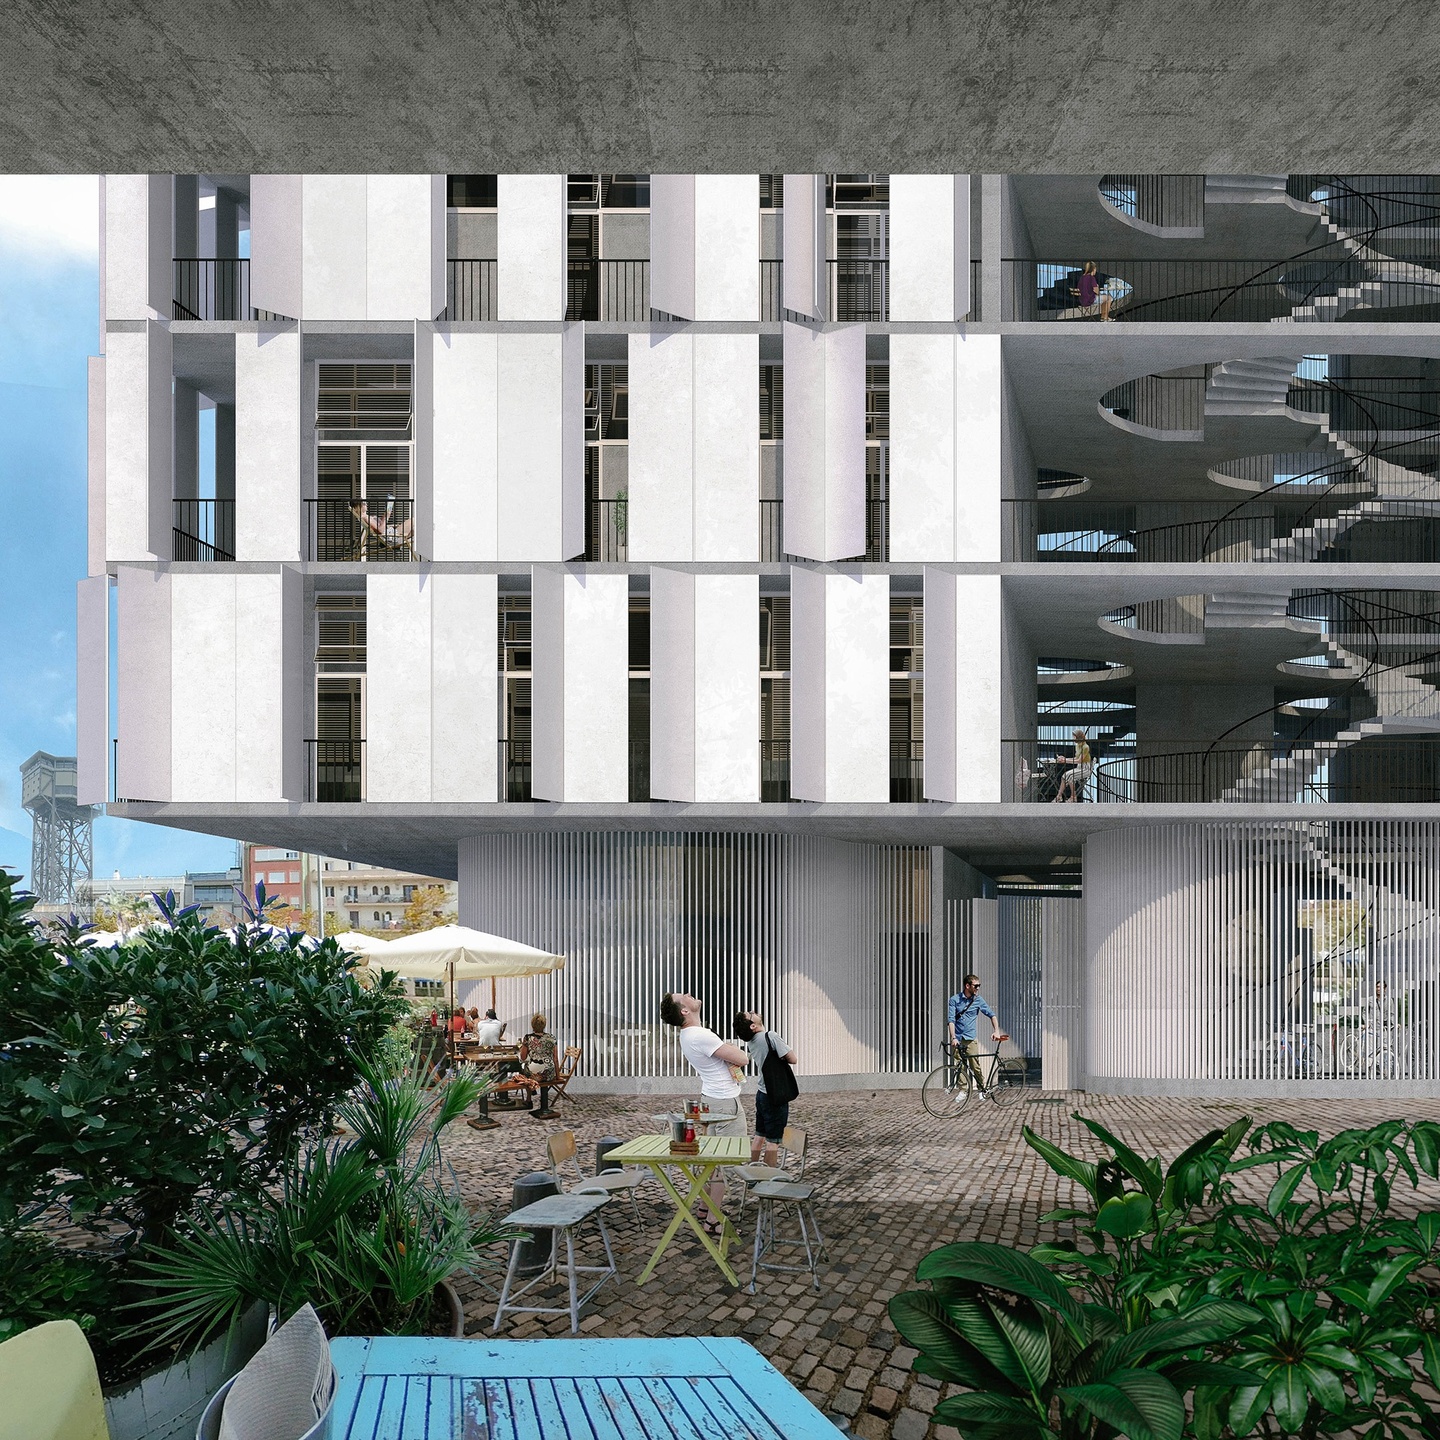 Computer rendering of the exterior corner of a large apartment building with tropical plants in the foreground. The building has large vertical panel facade system with an interior spiral stair open to the outside.